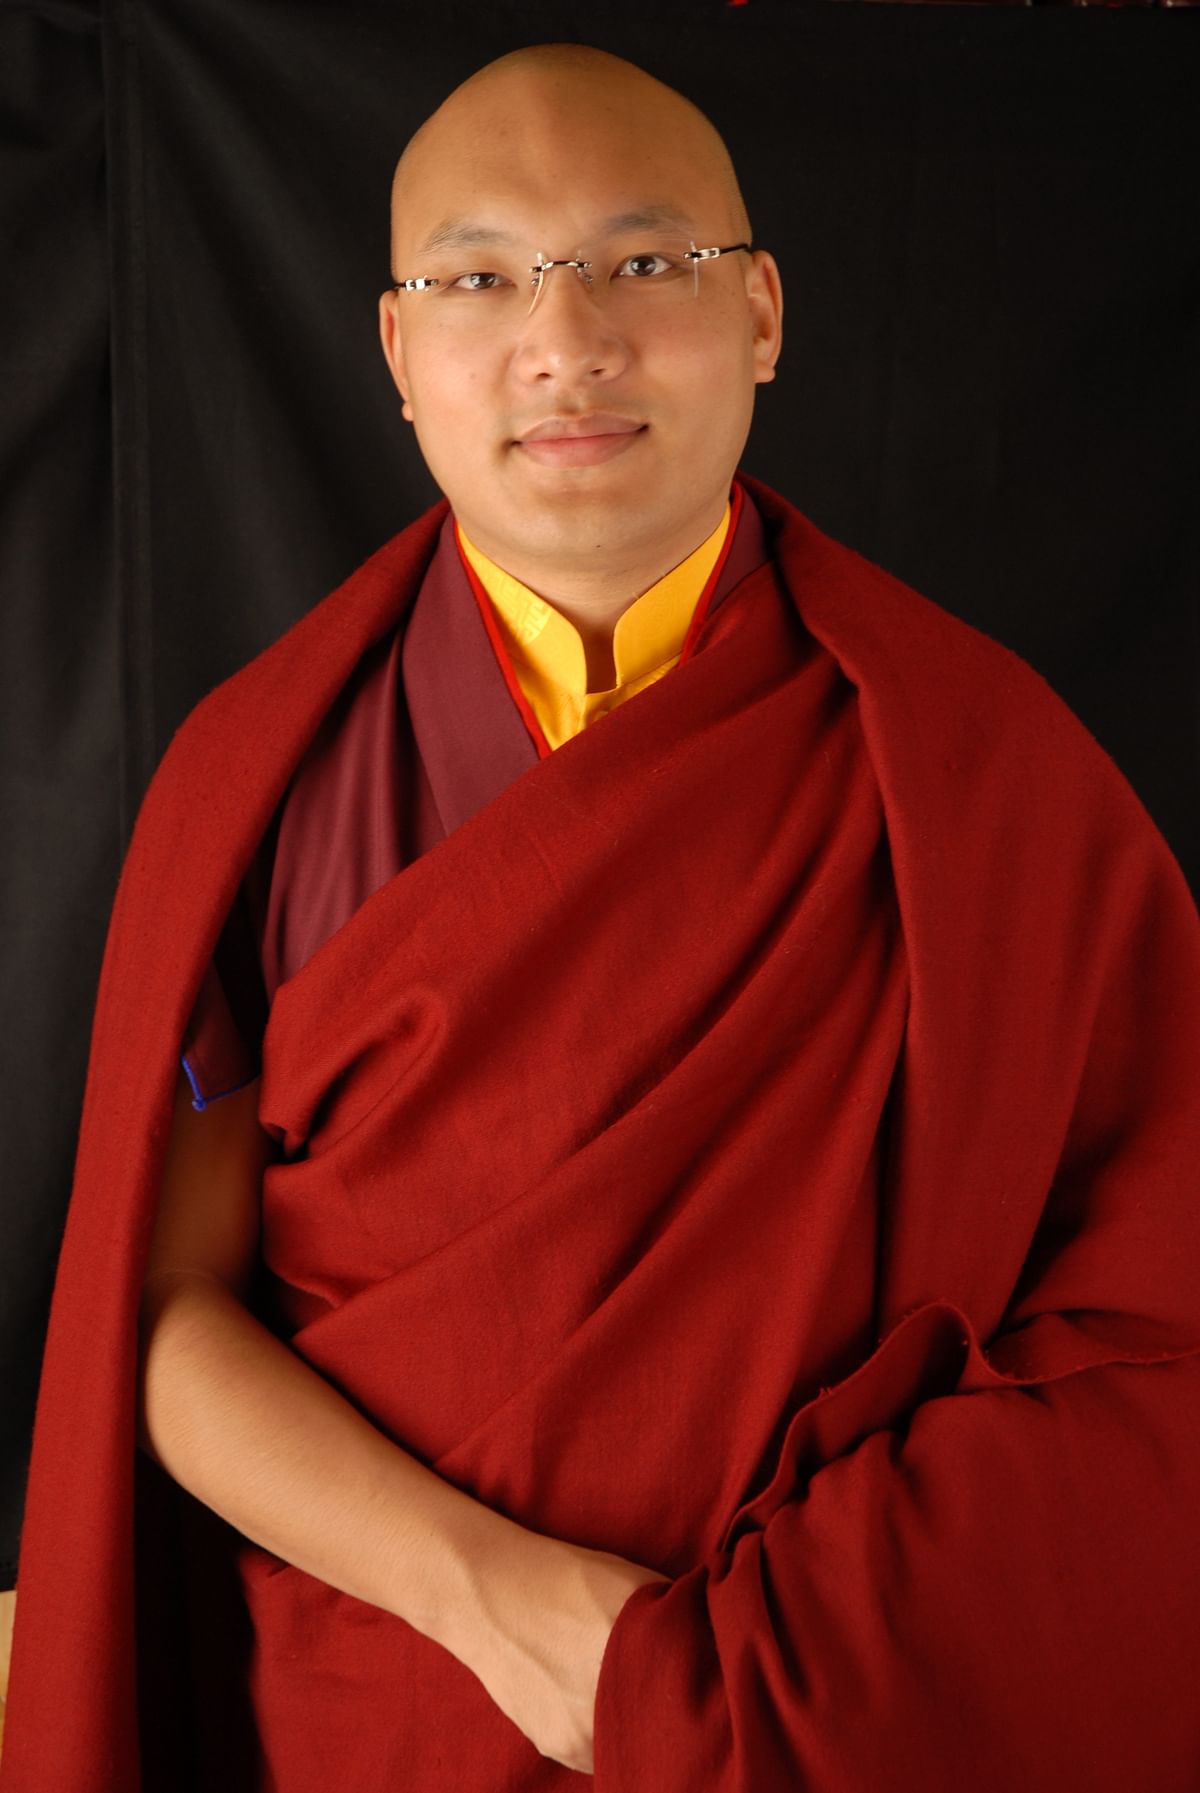 

Karmapa Lama, the 3rd most important Buddhist leader, escaped from Tibet and walked across the Himalayas to India.